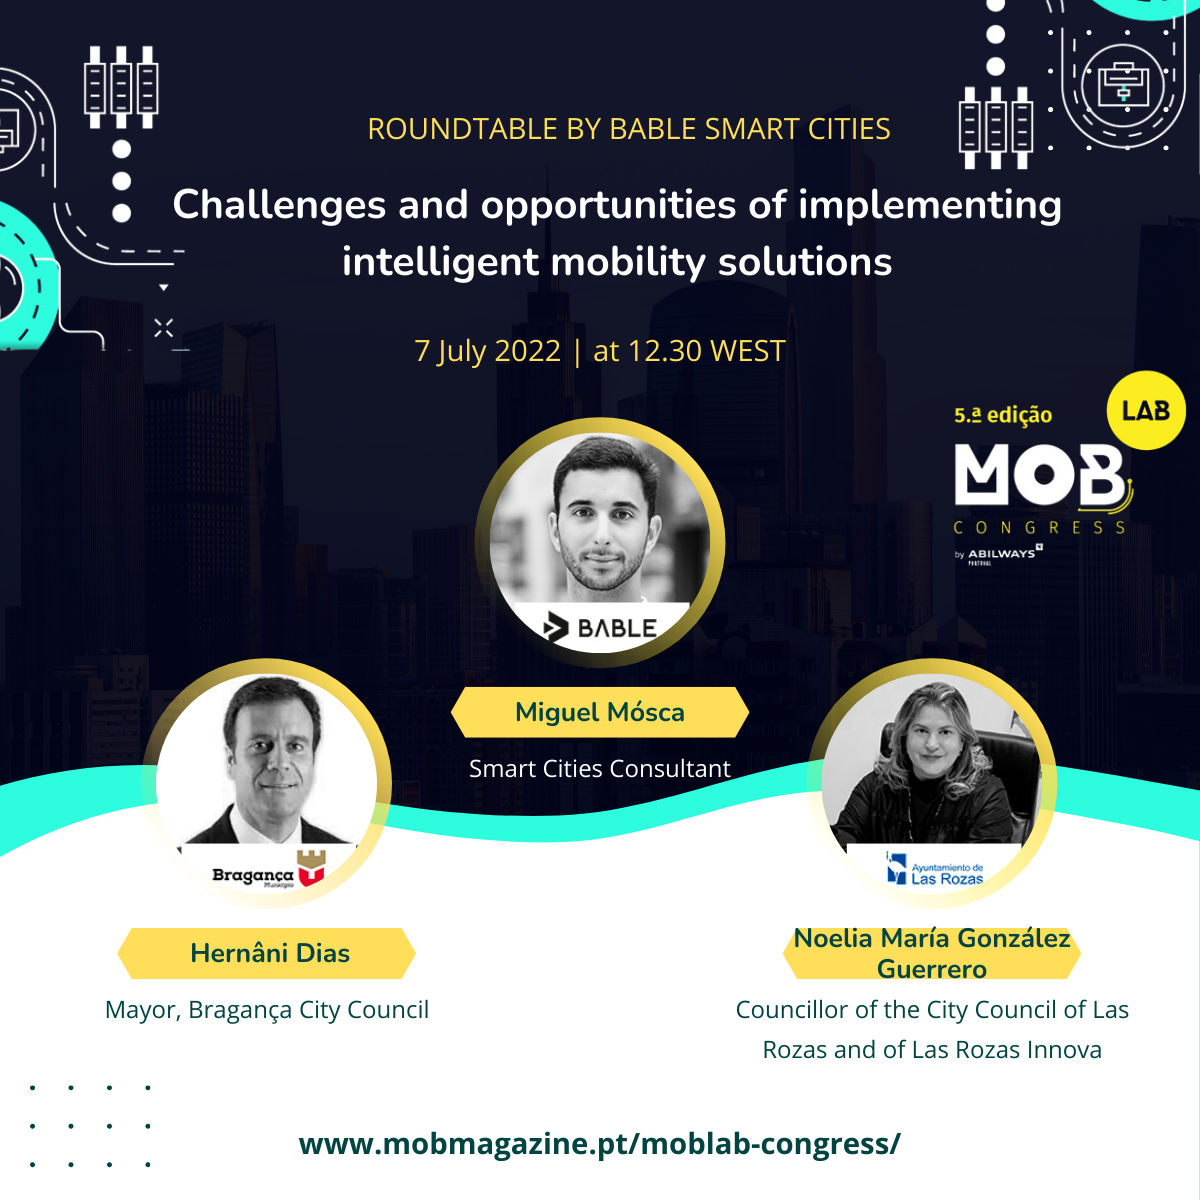 MobLab Congress 2022! Round Table by BABLE Smart Cities